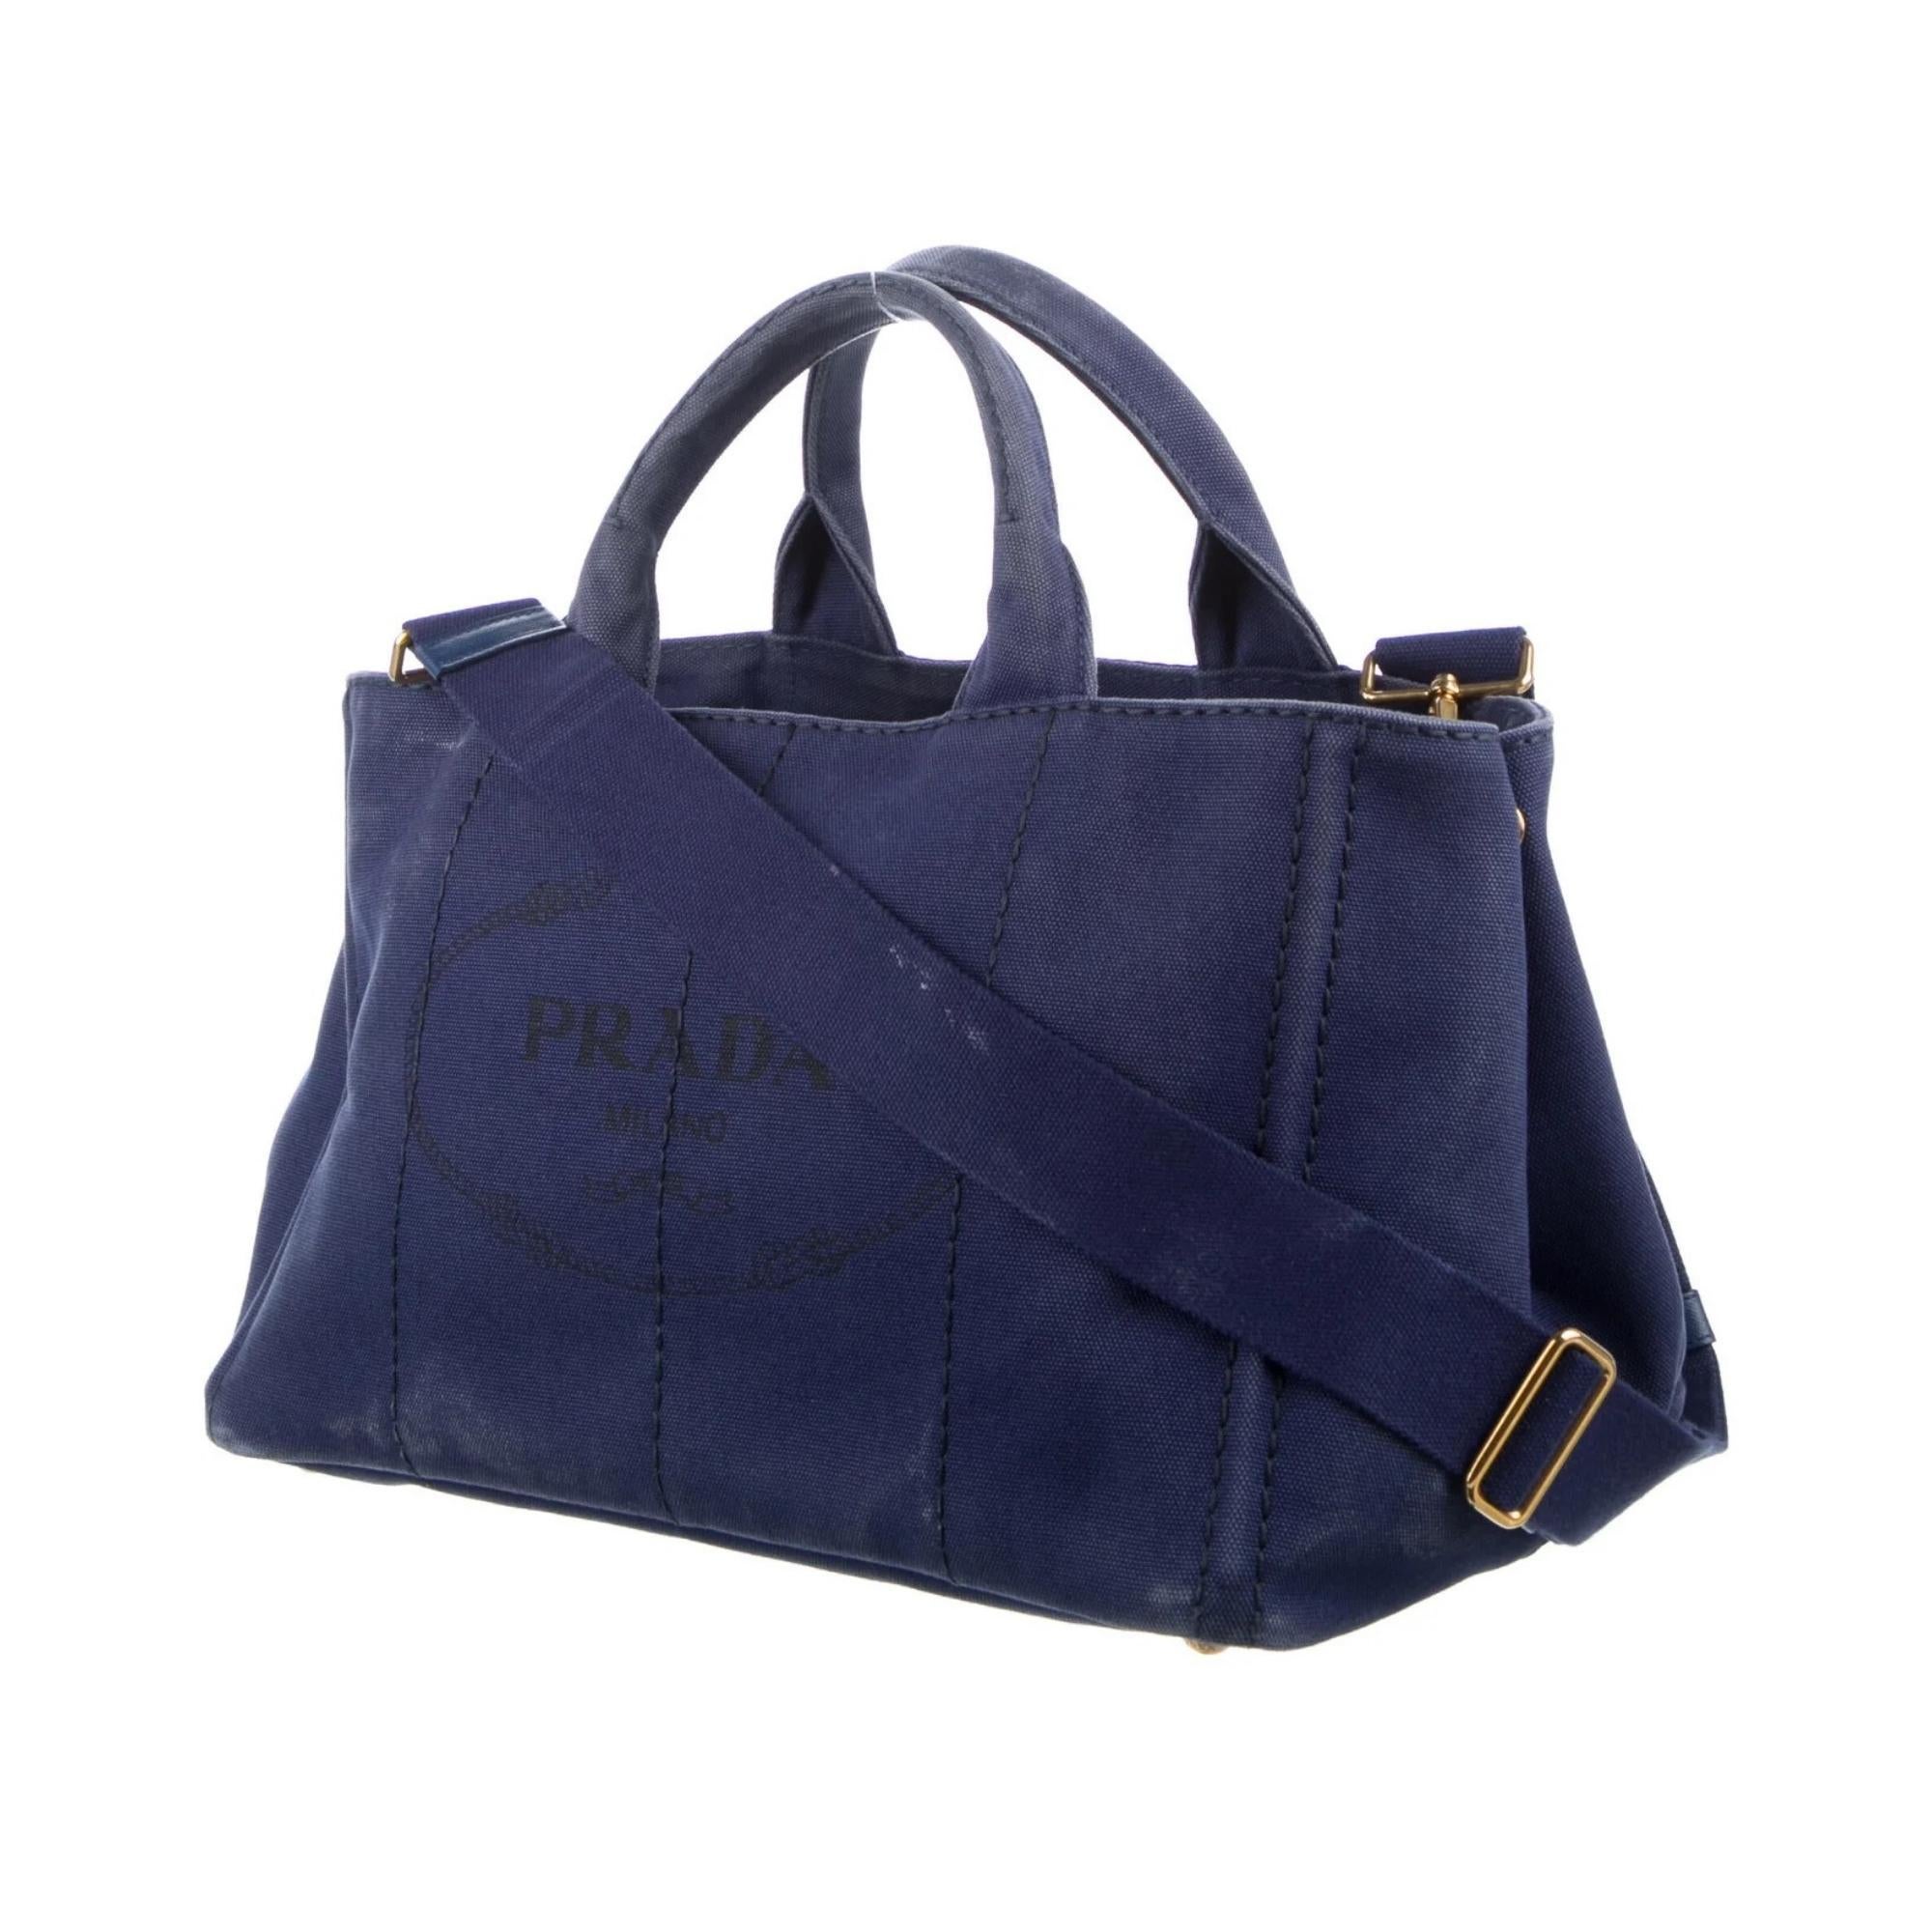 Prada Tote. From the 2015 Collection. Bauletto. Gold-Tone Hardware. Flat Handles. Canvas Lining & Five Interior Pockets. Open Top. Protective Feet at Base.

COLOR: Blue
MATERIAL: Canvas
ITEM CODE: 203
REFERENCE CODE: 1BG642
MEASURES: H 8.5” x W